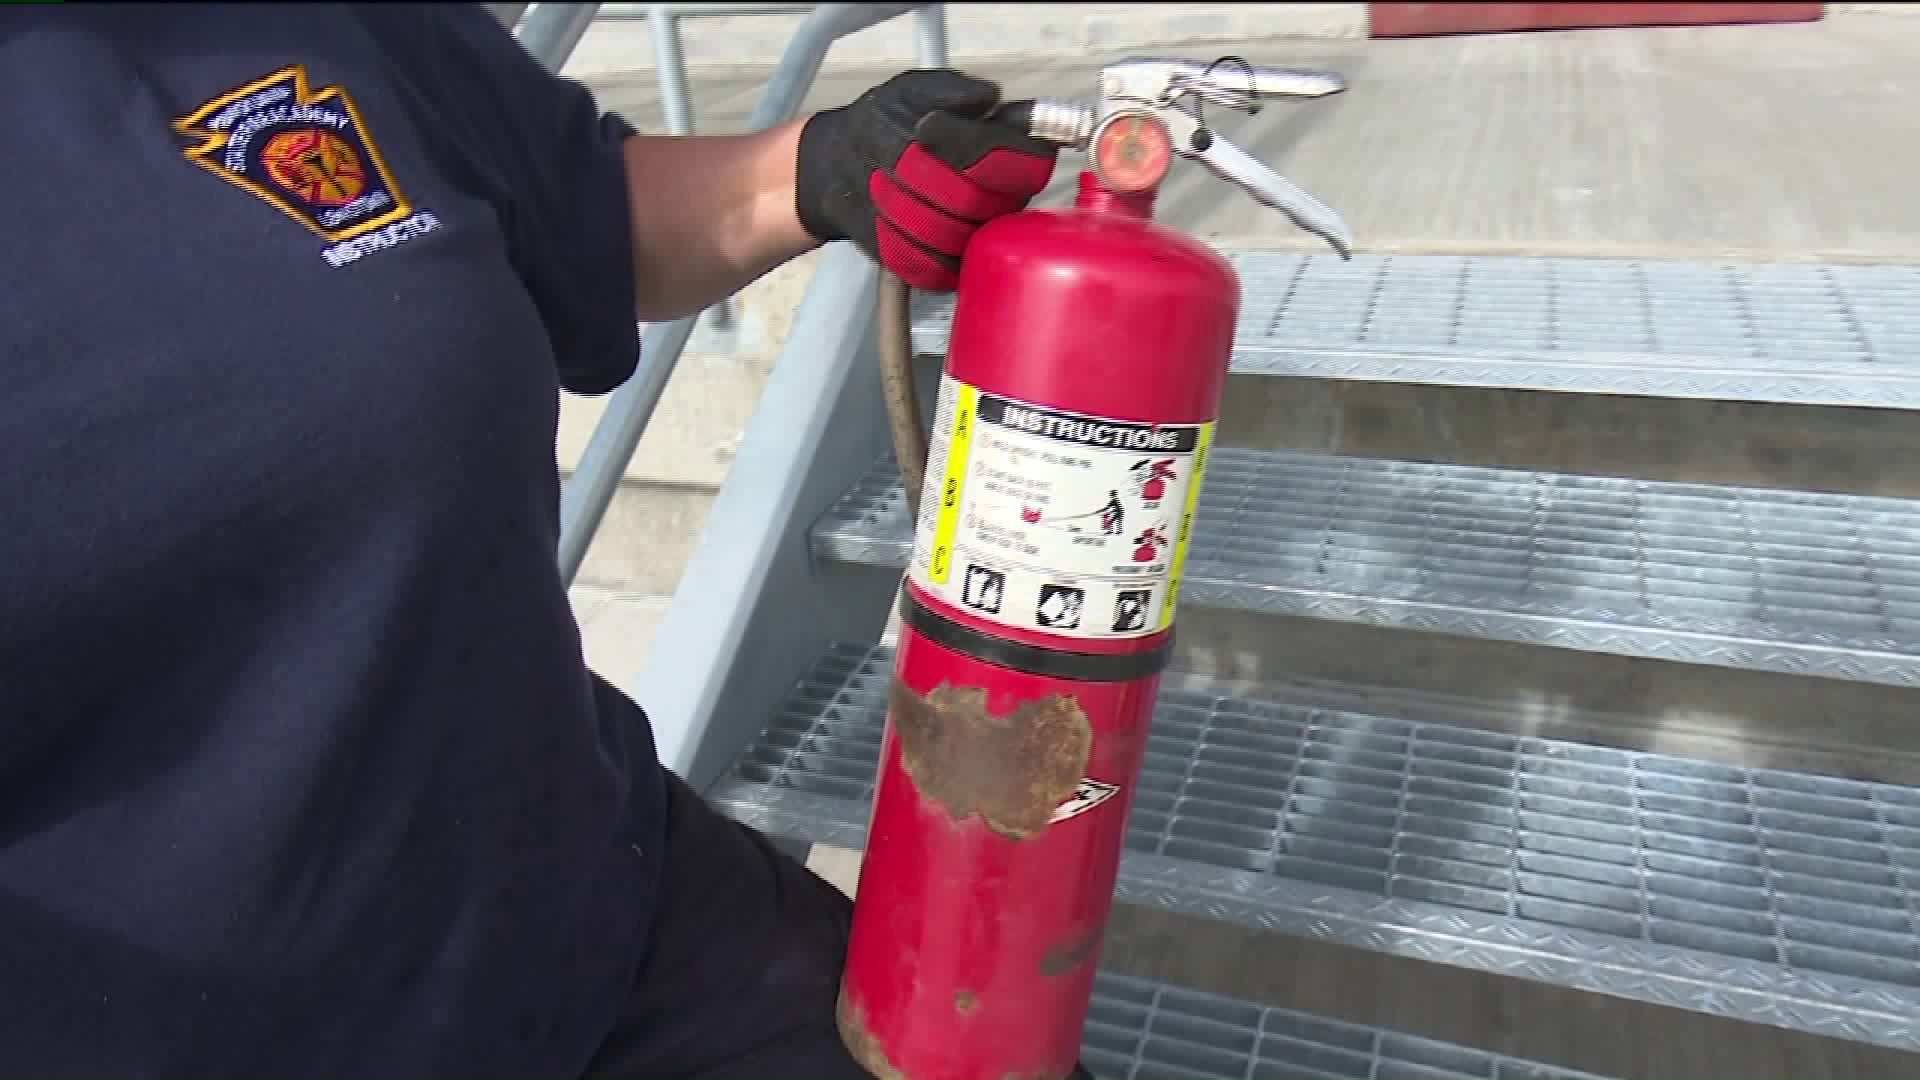 Following Massive Recall, Fire Officials Discuss Importance of Fire Extinguishers